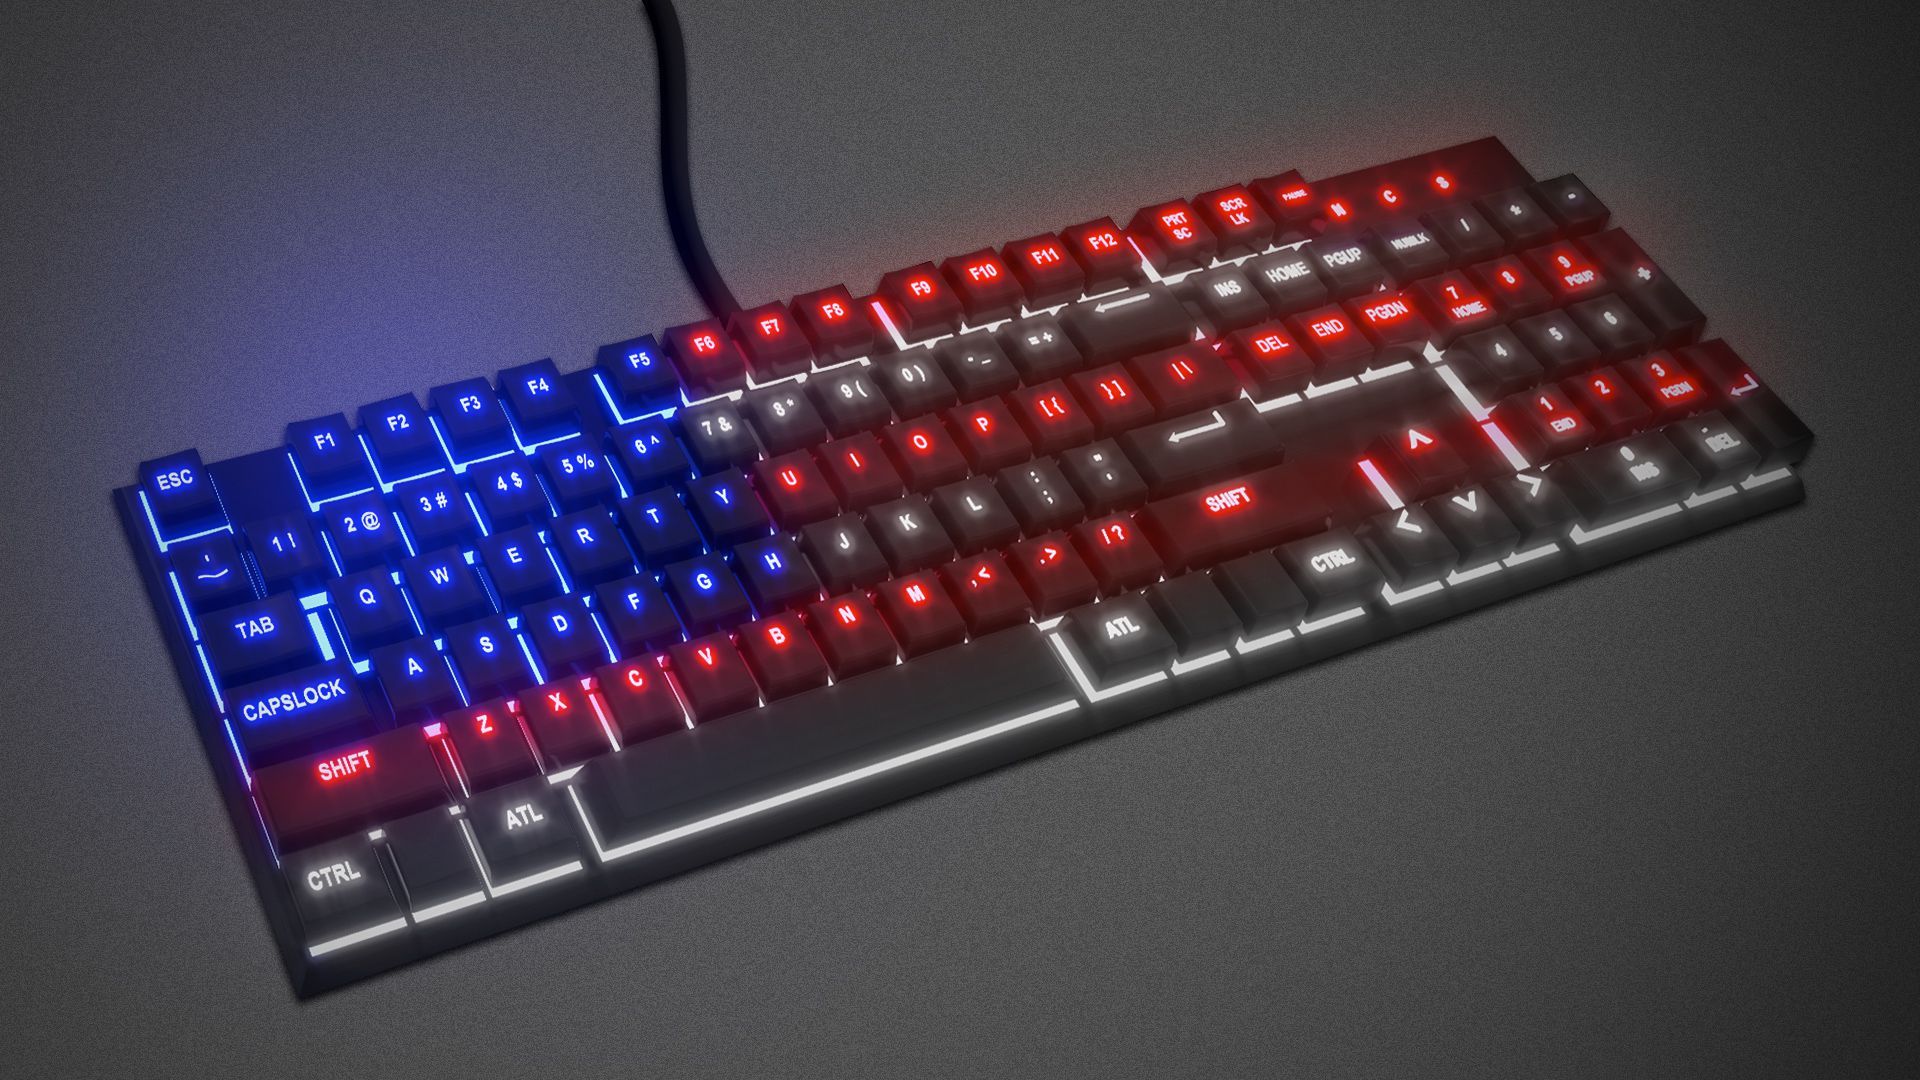 Illustration of a gaming keyboard glowing with the colors and pattern of the American flag.